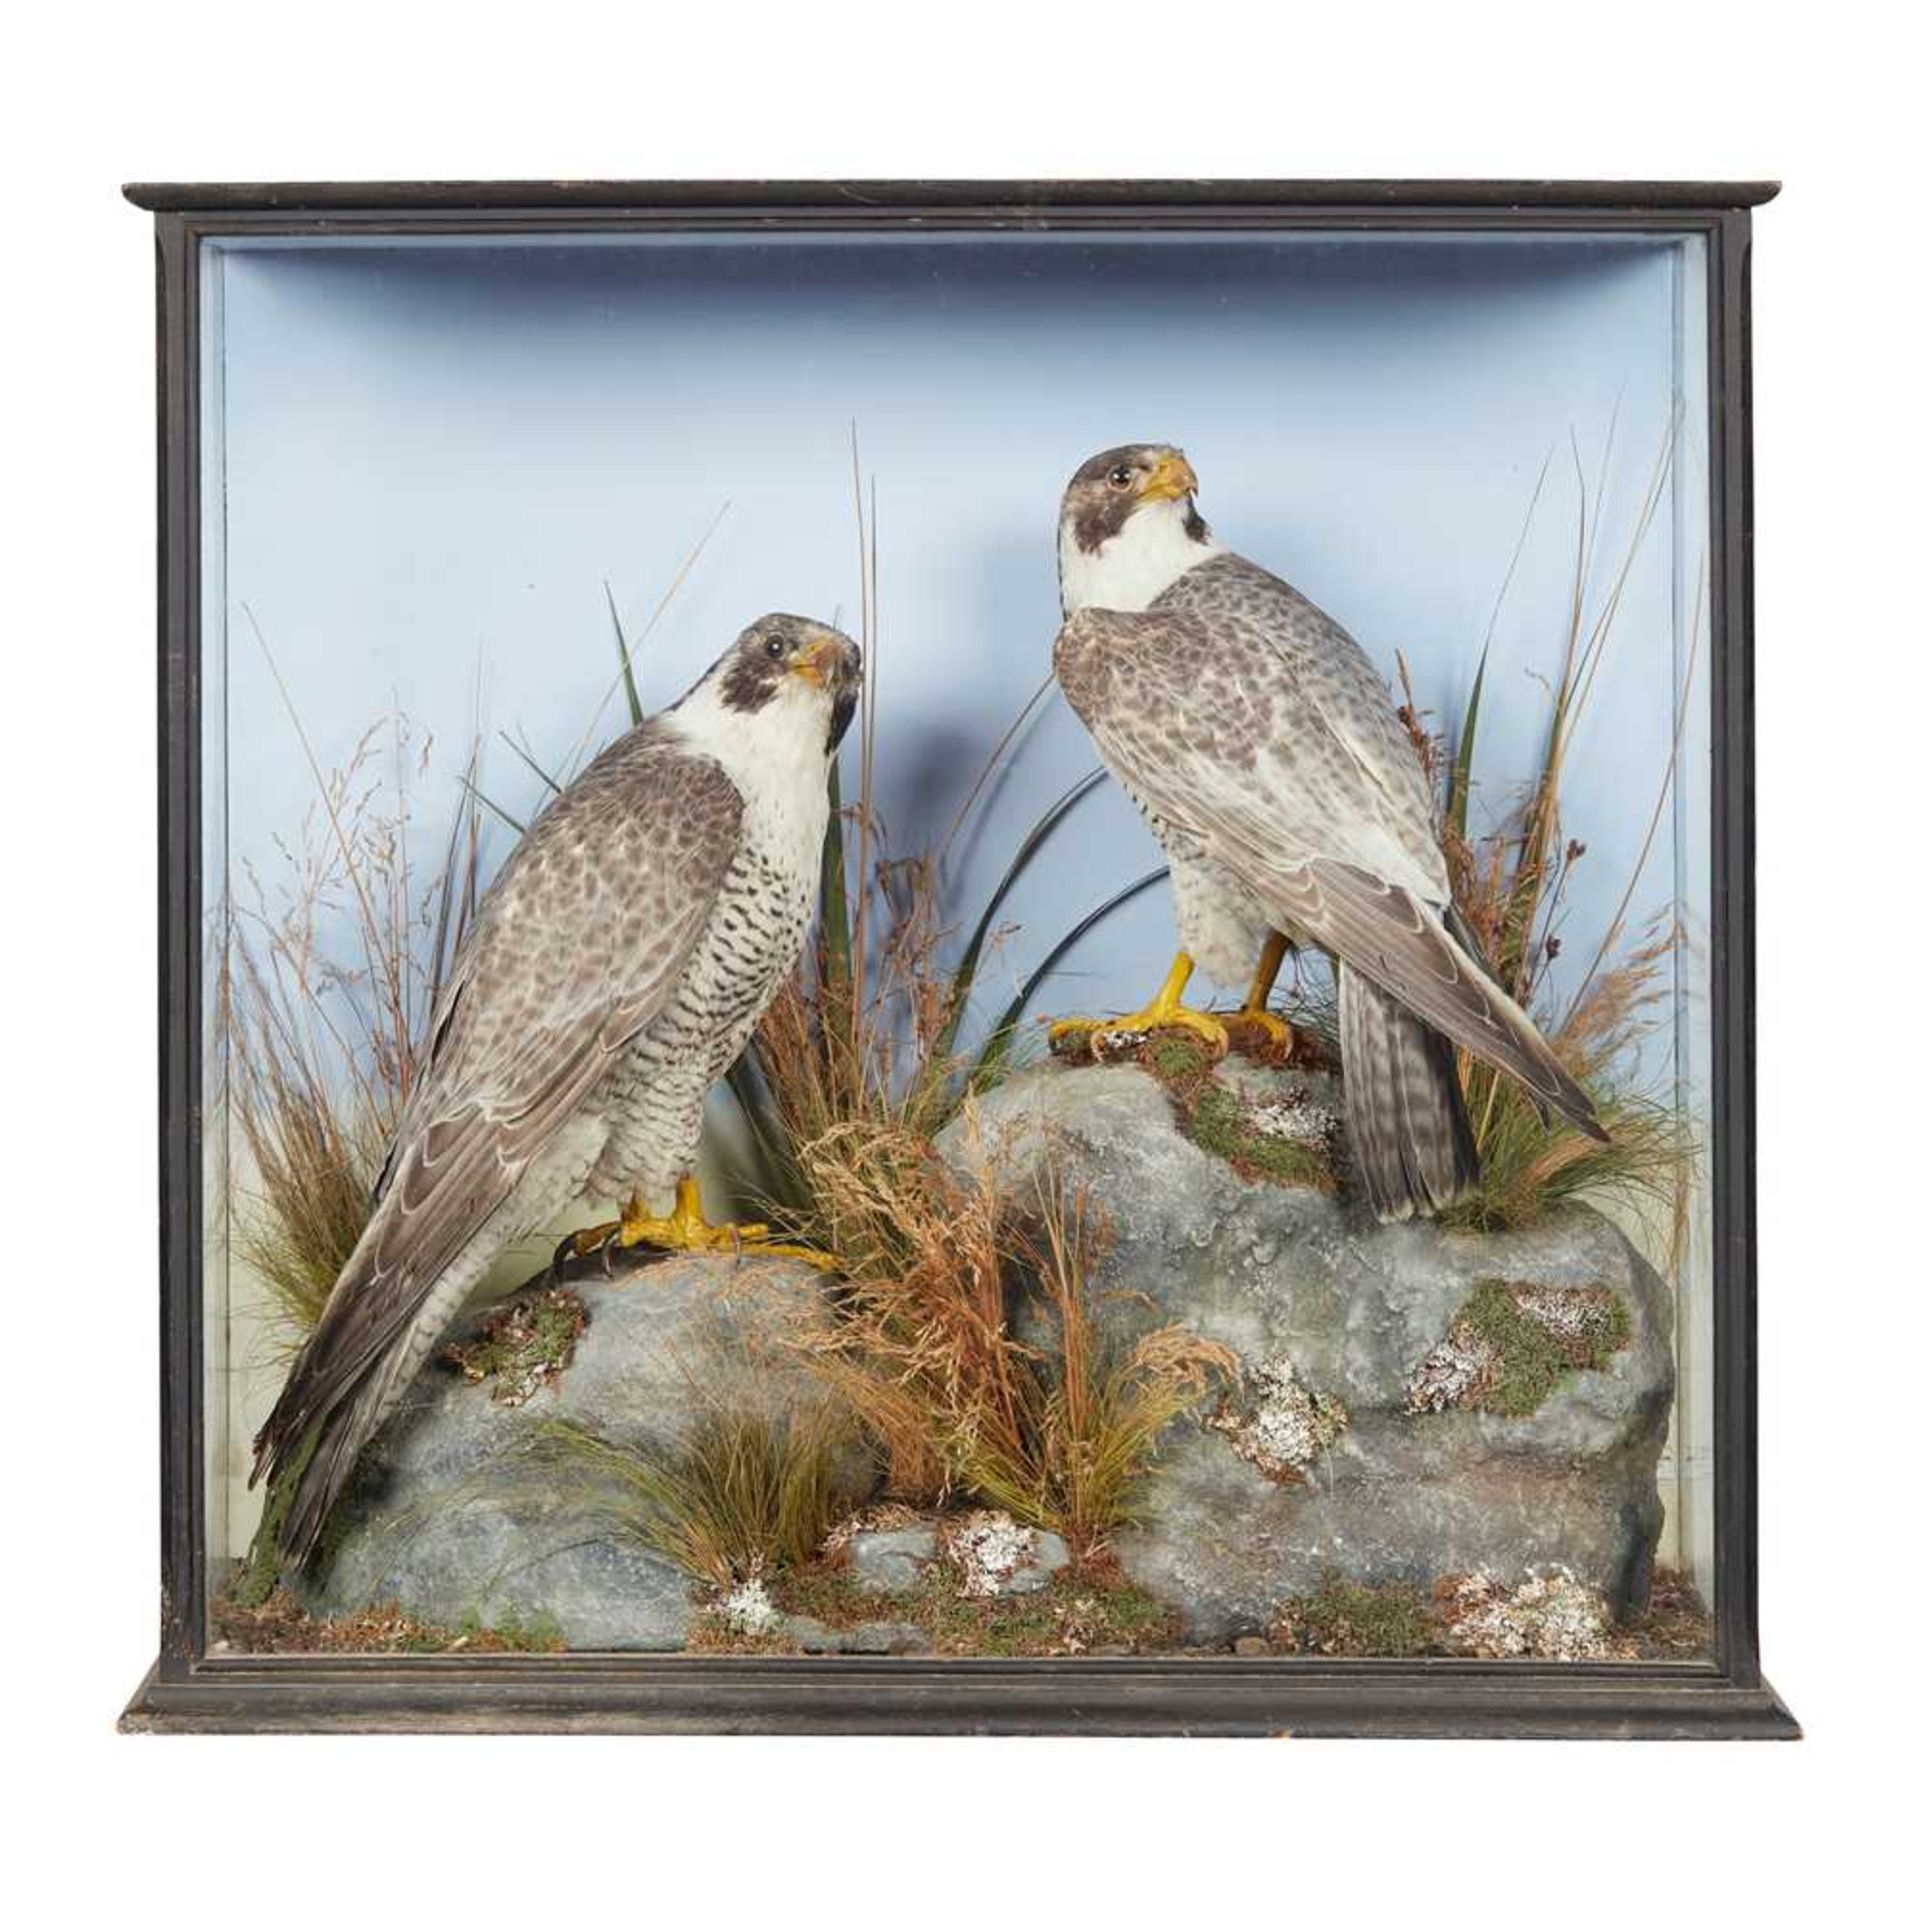 A LATE VICTORIAN CASED PAIR OF TAXIDERMY PEREGRINE FALCONS (FALCO PEREGRINUS) BY W. A. MACLEAY & SON